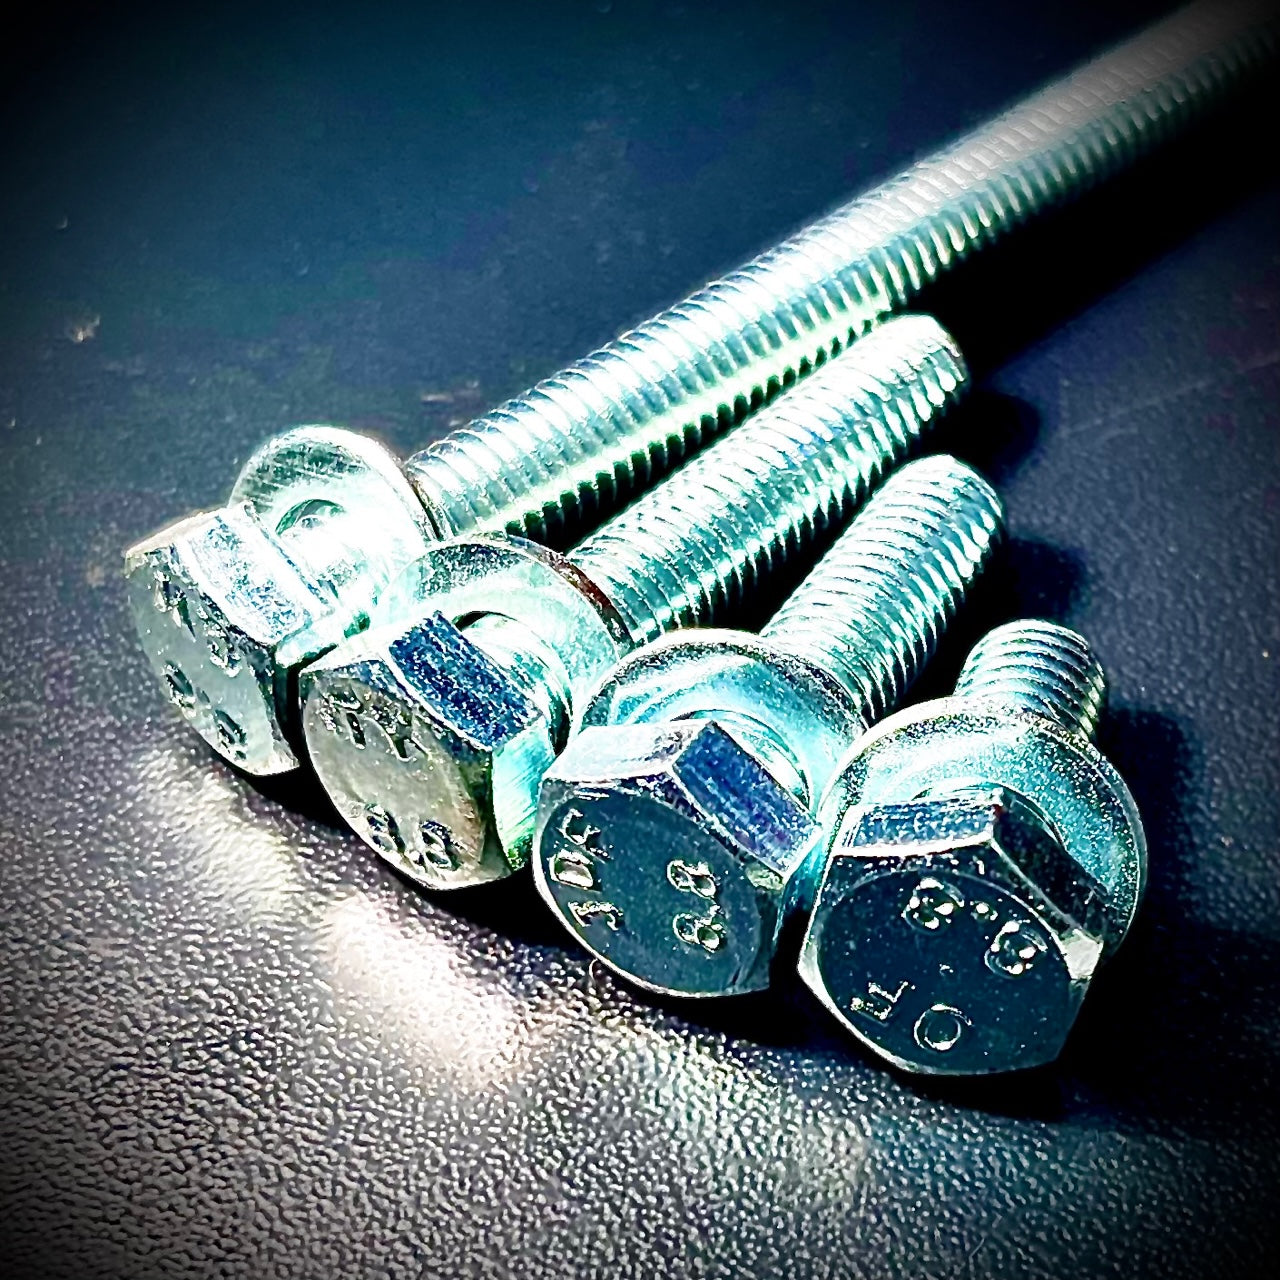 M10xOver 60mm Hex Set Screw plus Washer HT 8.8 Zinc DIN933 - Fixaball Ltd. Fixings and Fasteners UK